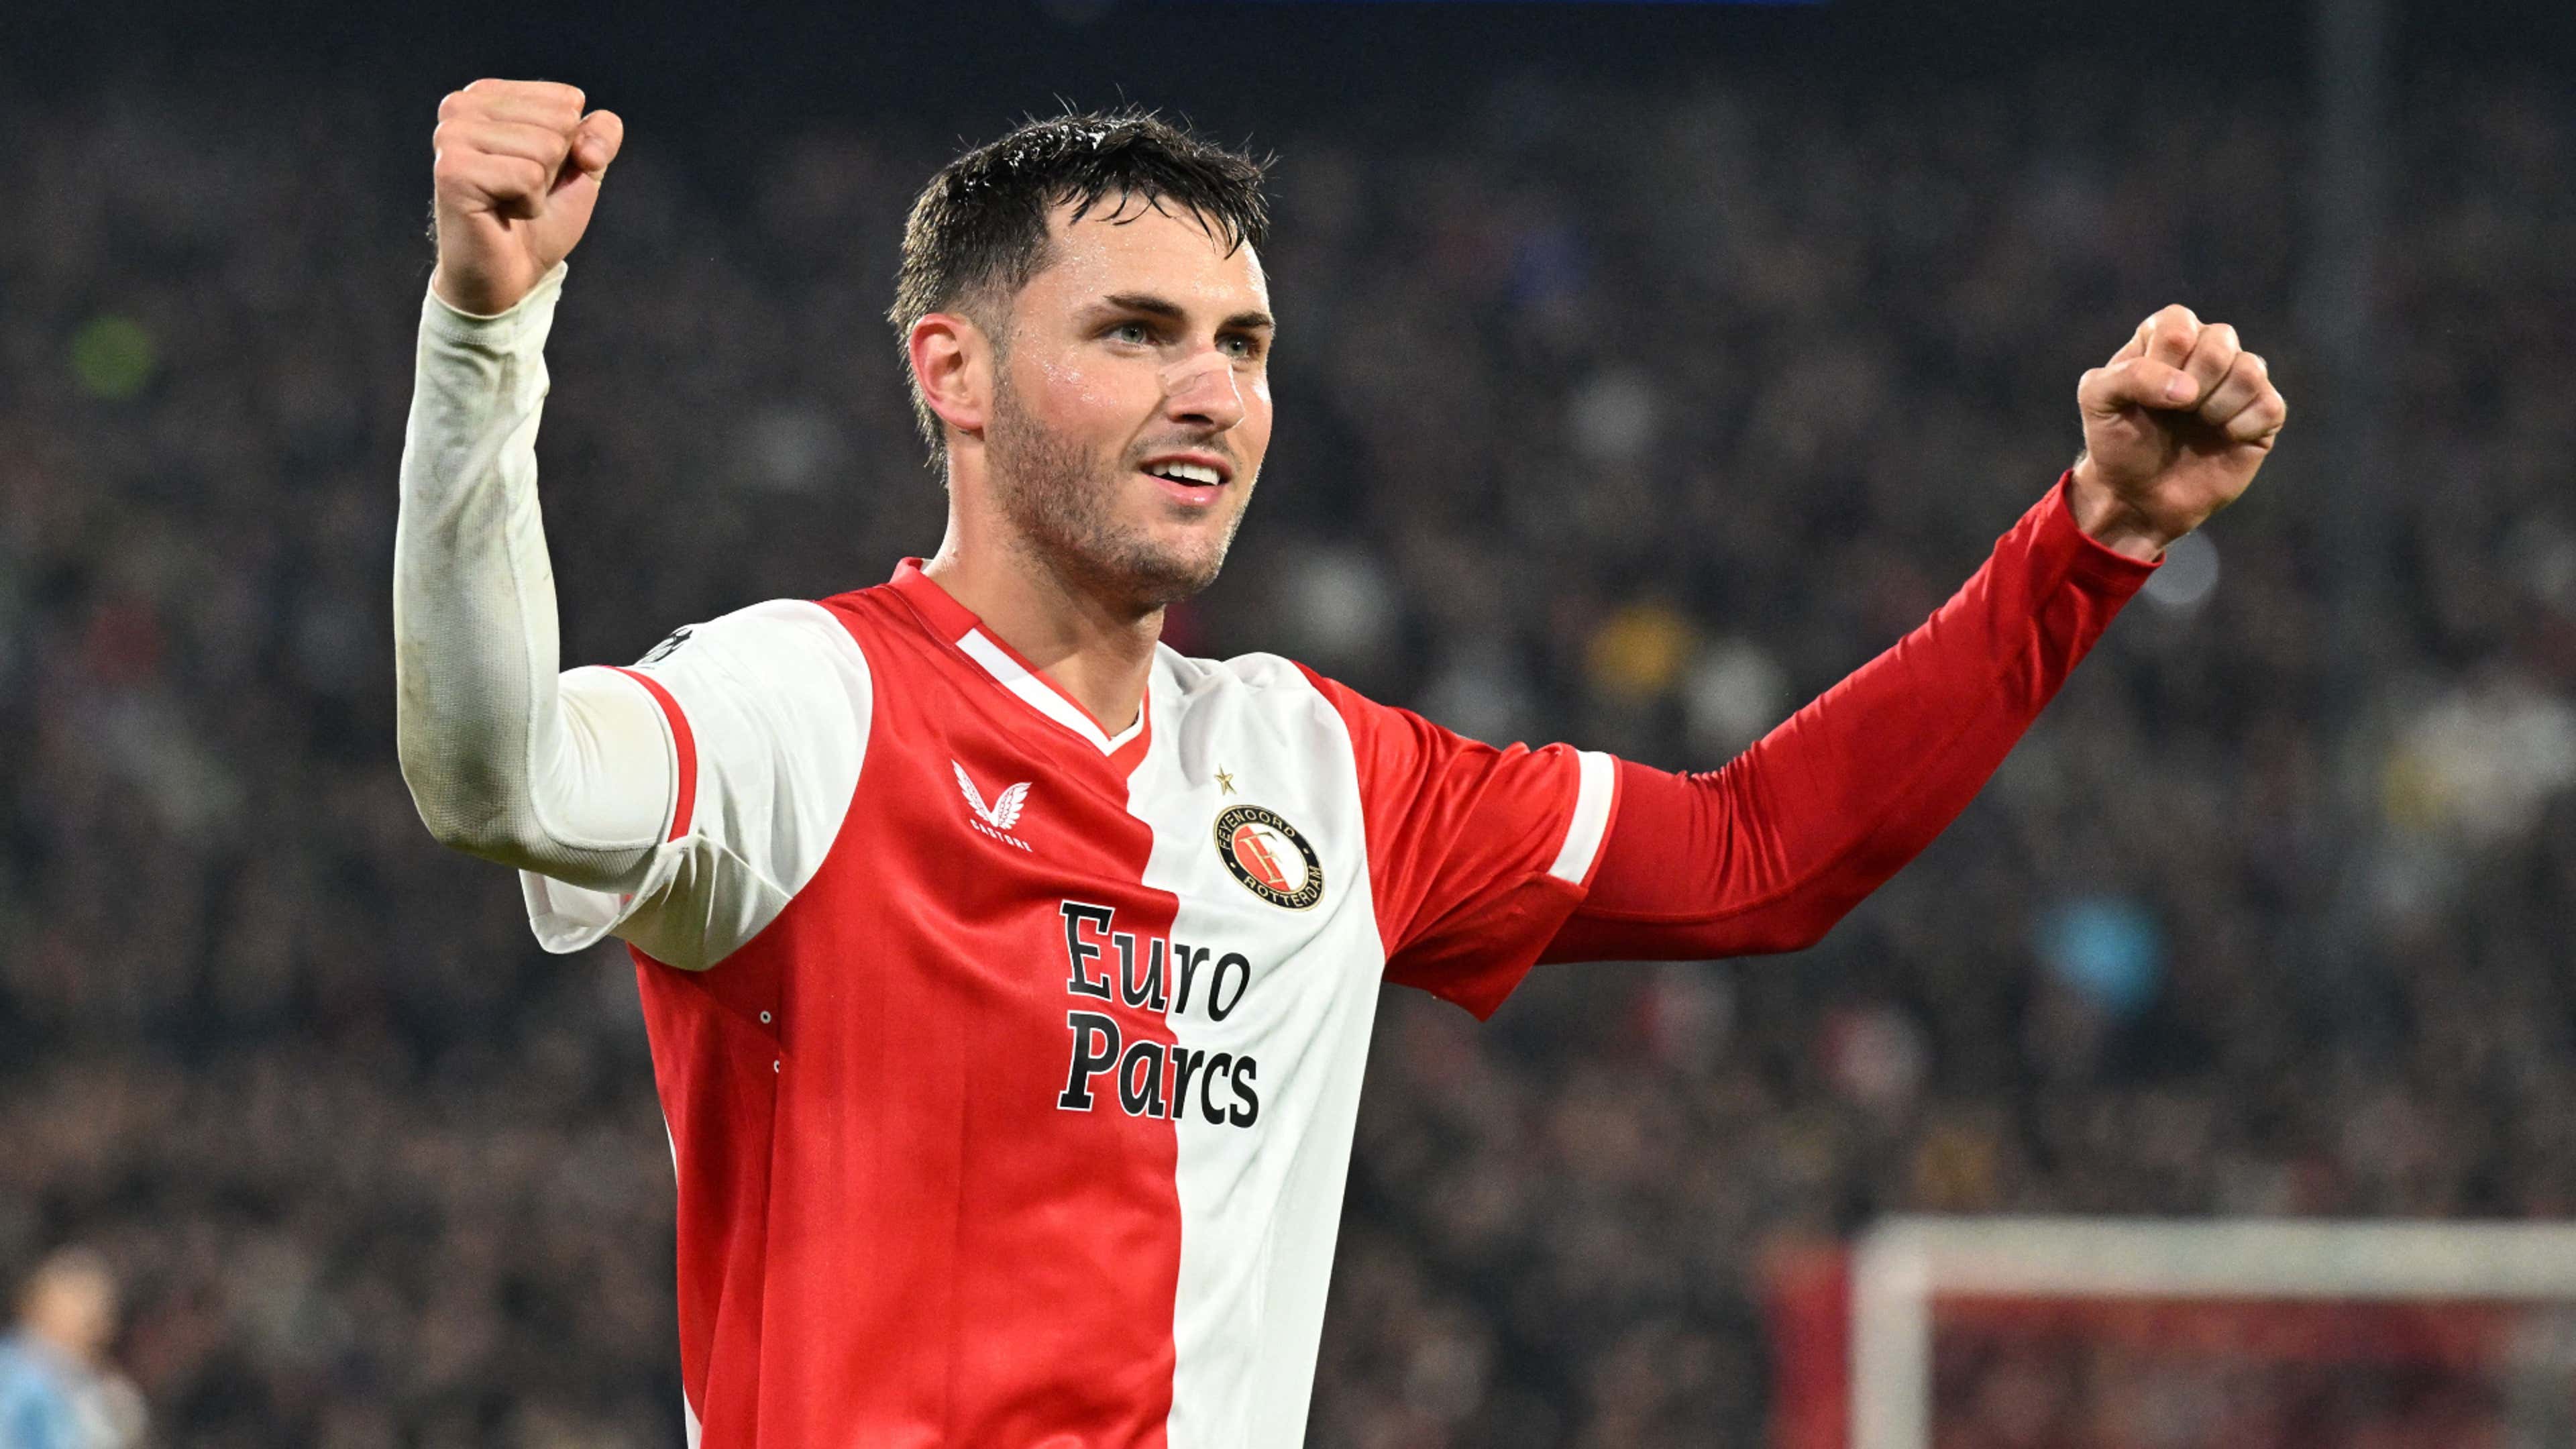 Santiago Gimenez is unstoppable! Mexico and Feyenoord sensation smashes  Luis Suarez's Eredivisie scoring feat amid transfer interest from Real  Madrid, Barcelona and Chelsea | Goal.com